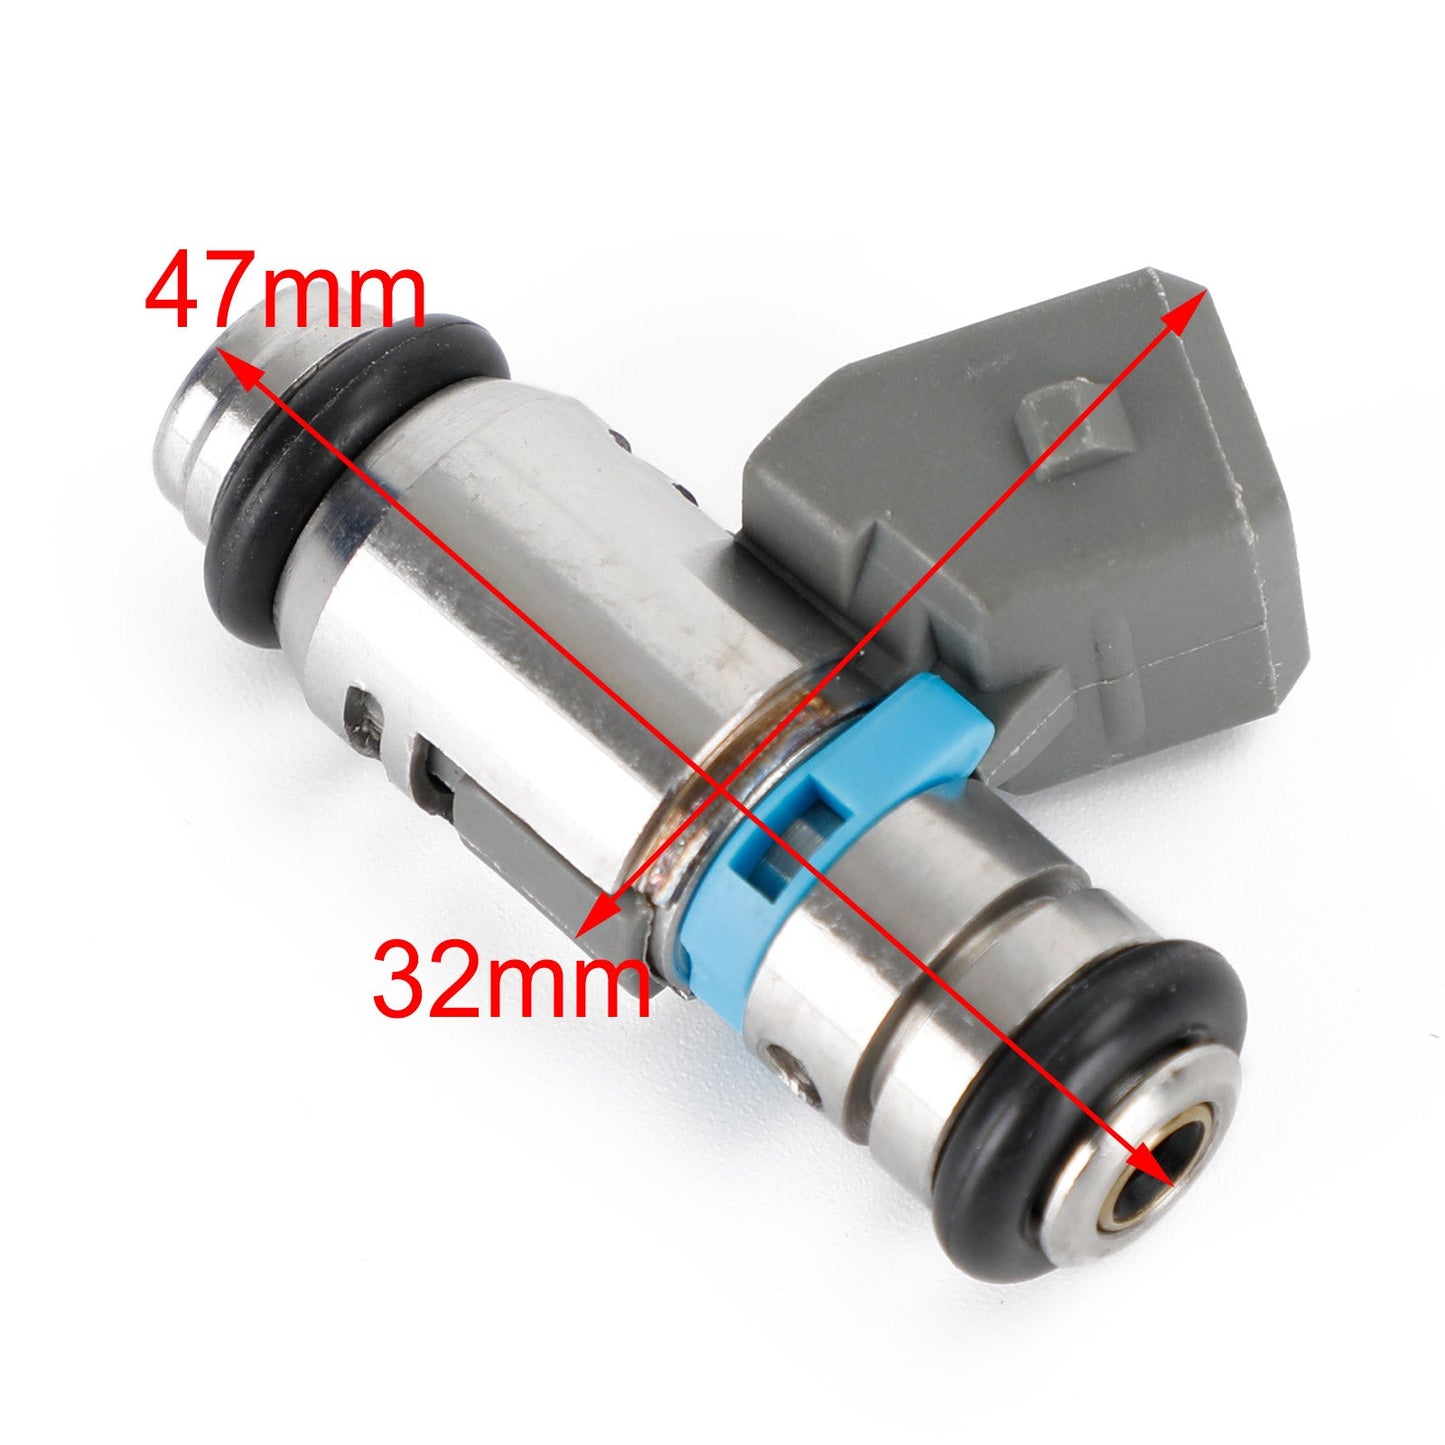 2PCS IWP-181 Twin Power 3.8 g/s Fuel Injector Direct For Repl 27706-07/A